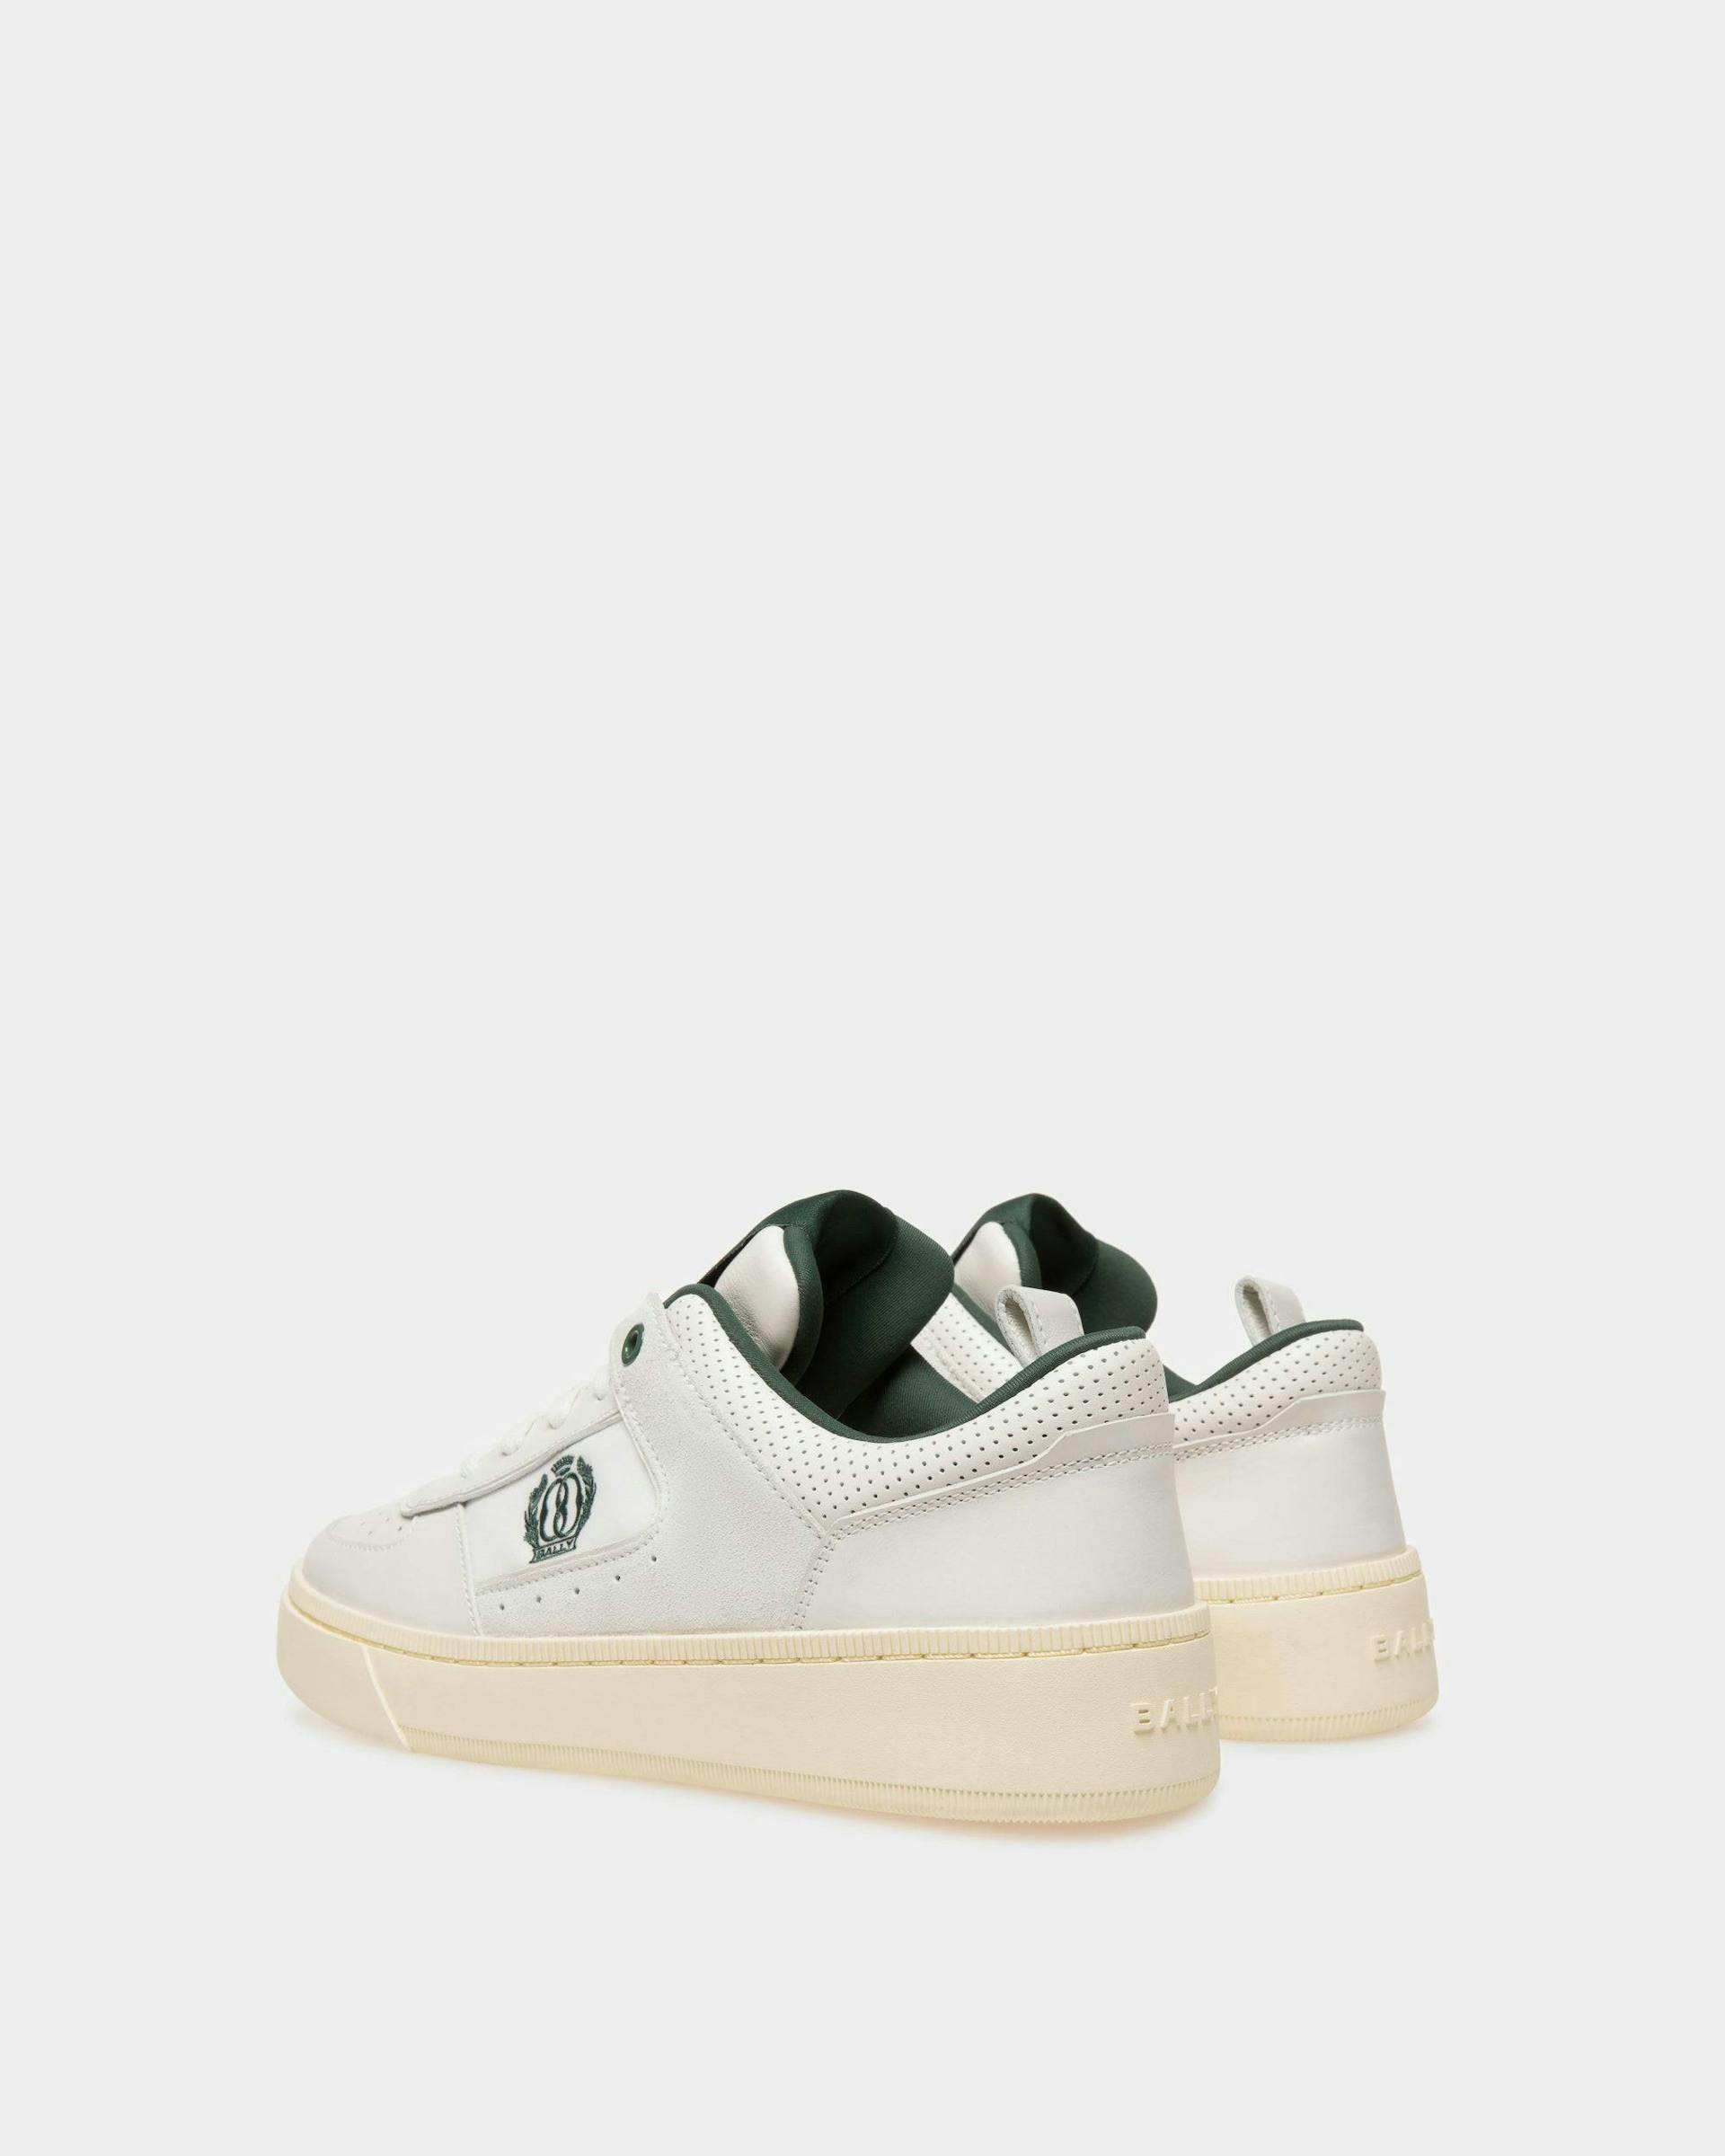 Raise Sneakers In White And Green Leather - Women's - Bally - 03